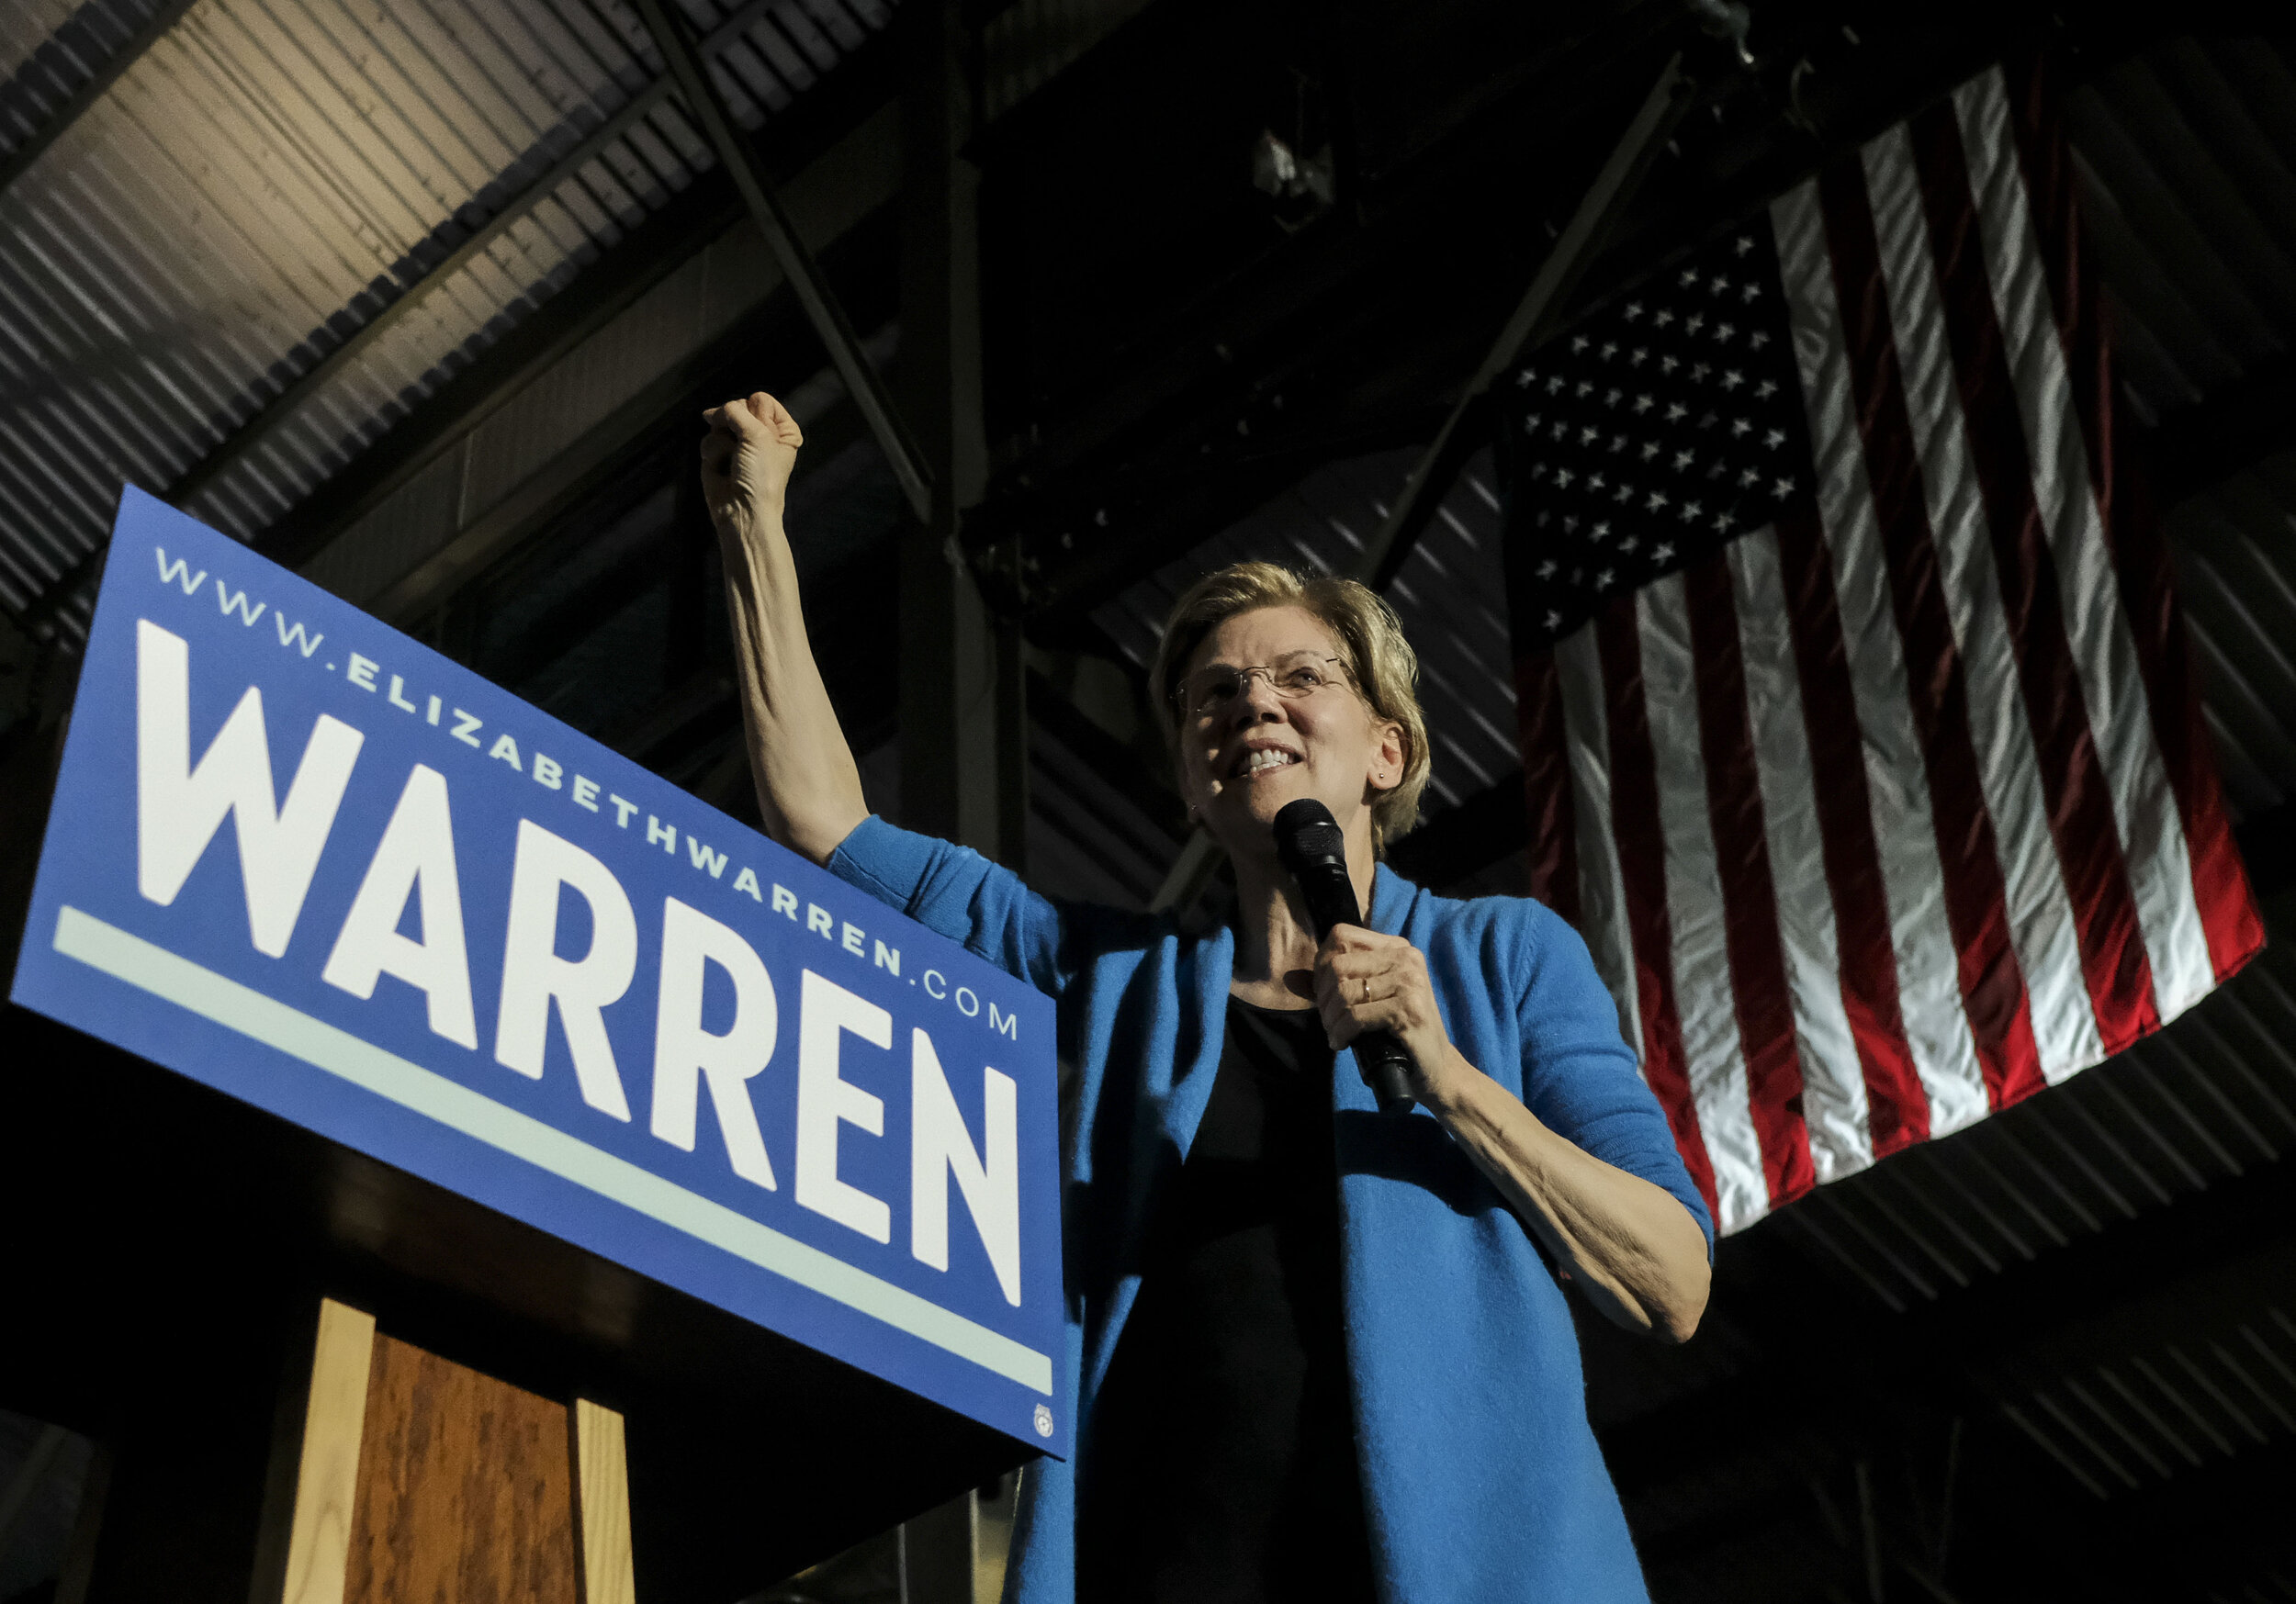  Democratic candidate Elizabeth Warren states her intention on continuing to battle for the Democratic nomination during a rally in Detroit, Michigan on March 3, 2020. Despite her promise to continue her campaign, Warren would drop out only a day lat